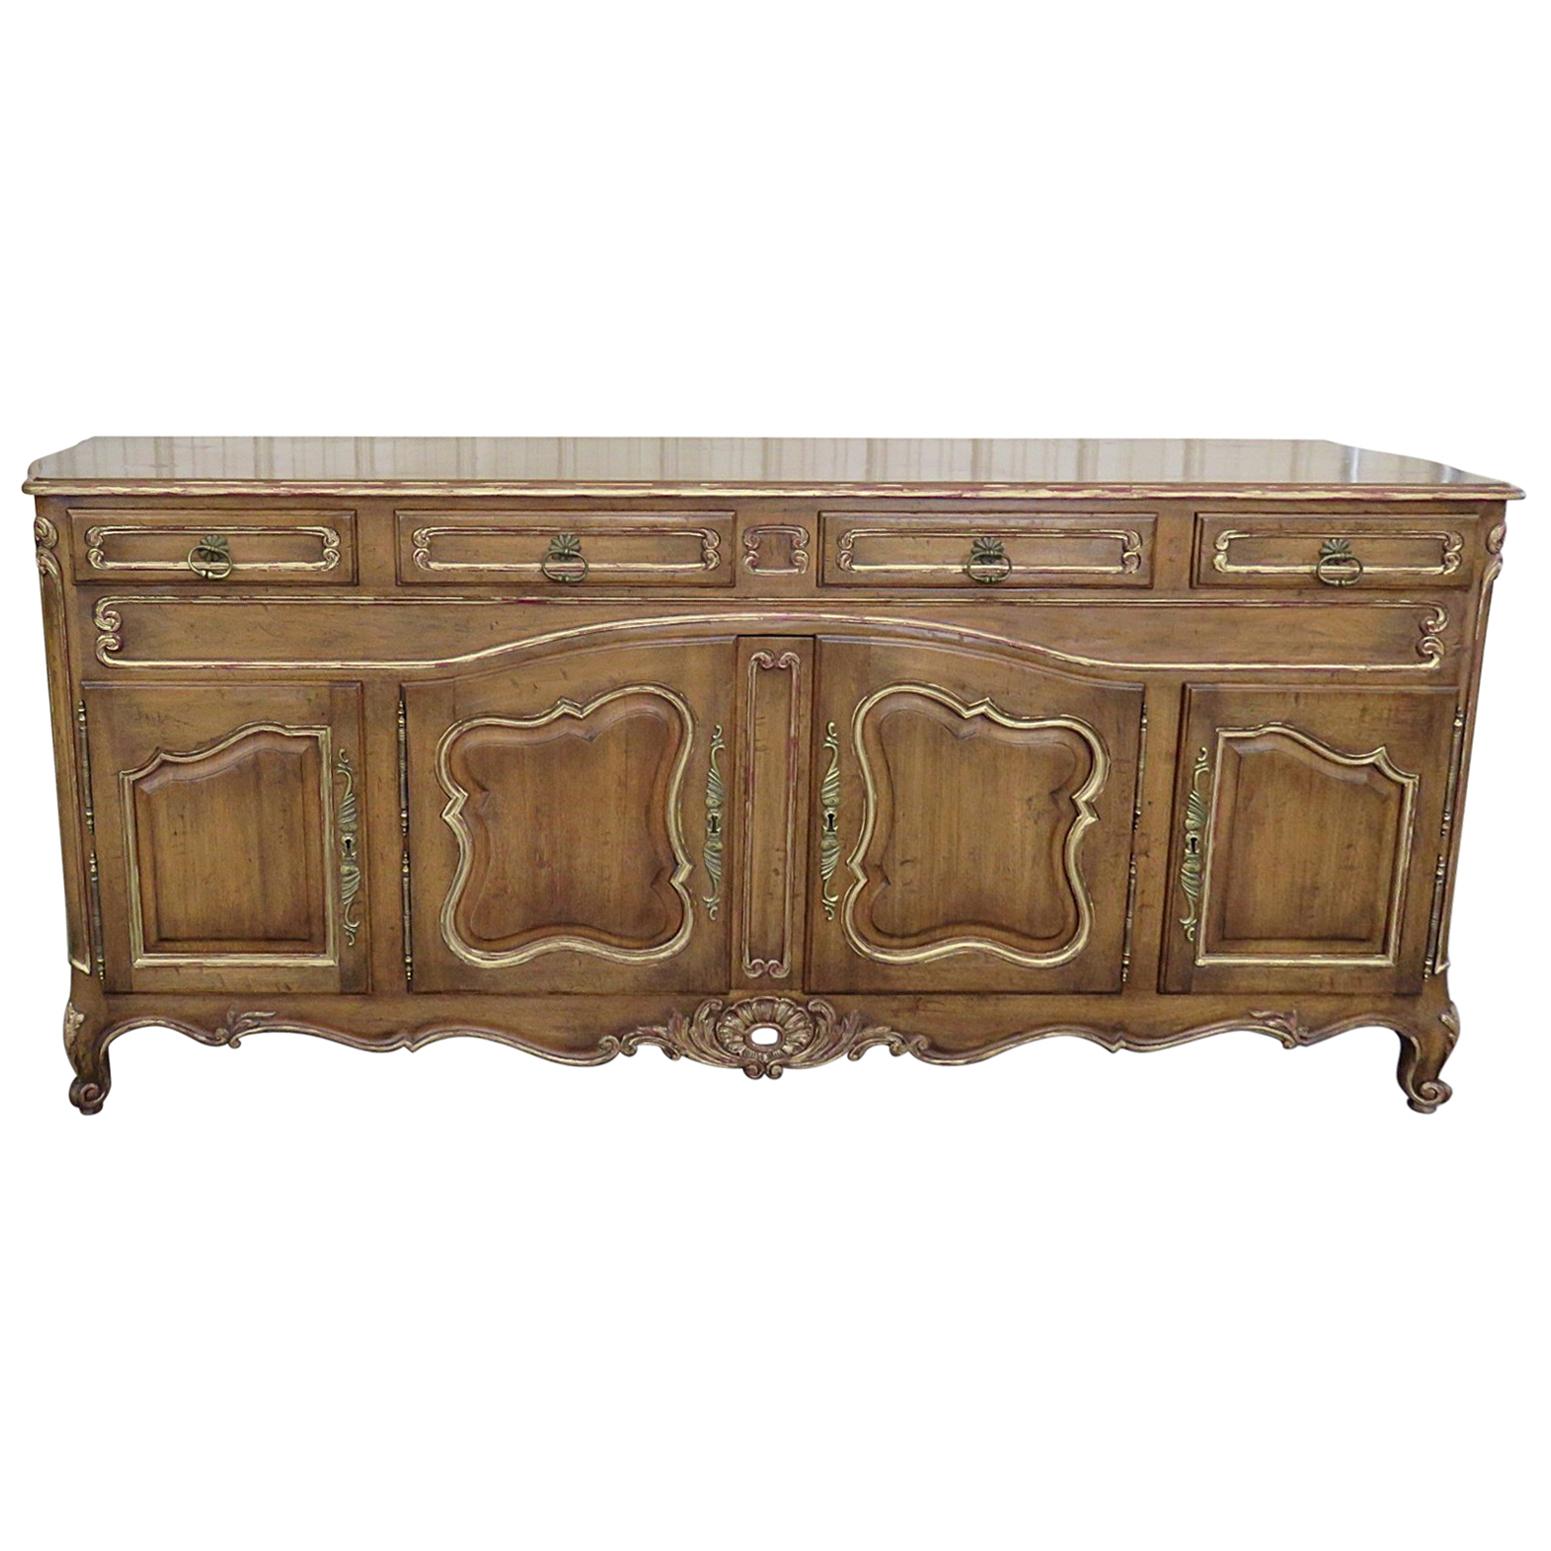 Auffray Attributed Antique Style Louis XV Country French Sideboard Buffet Server